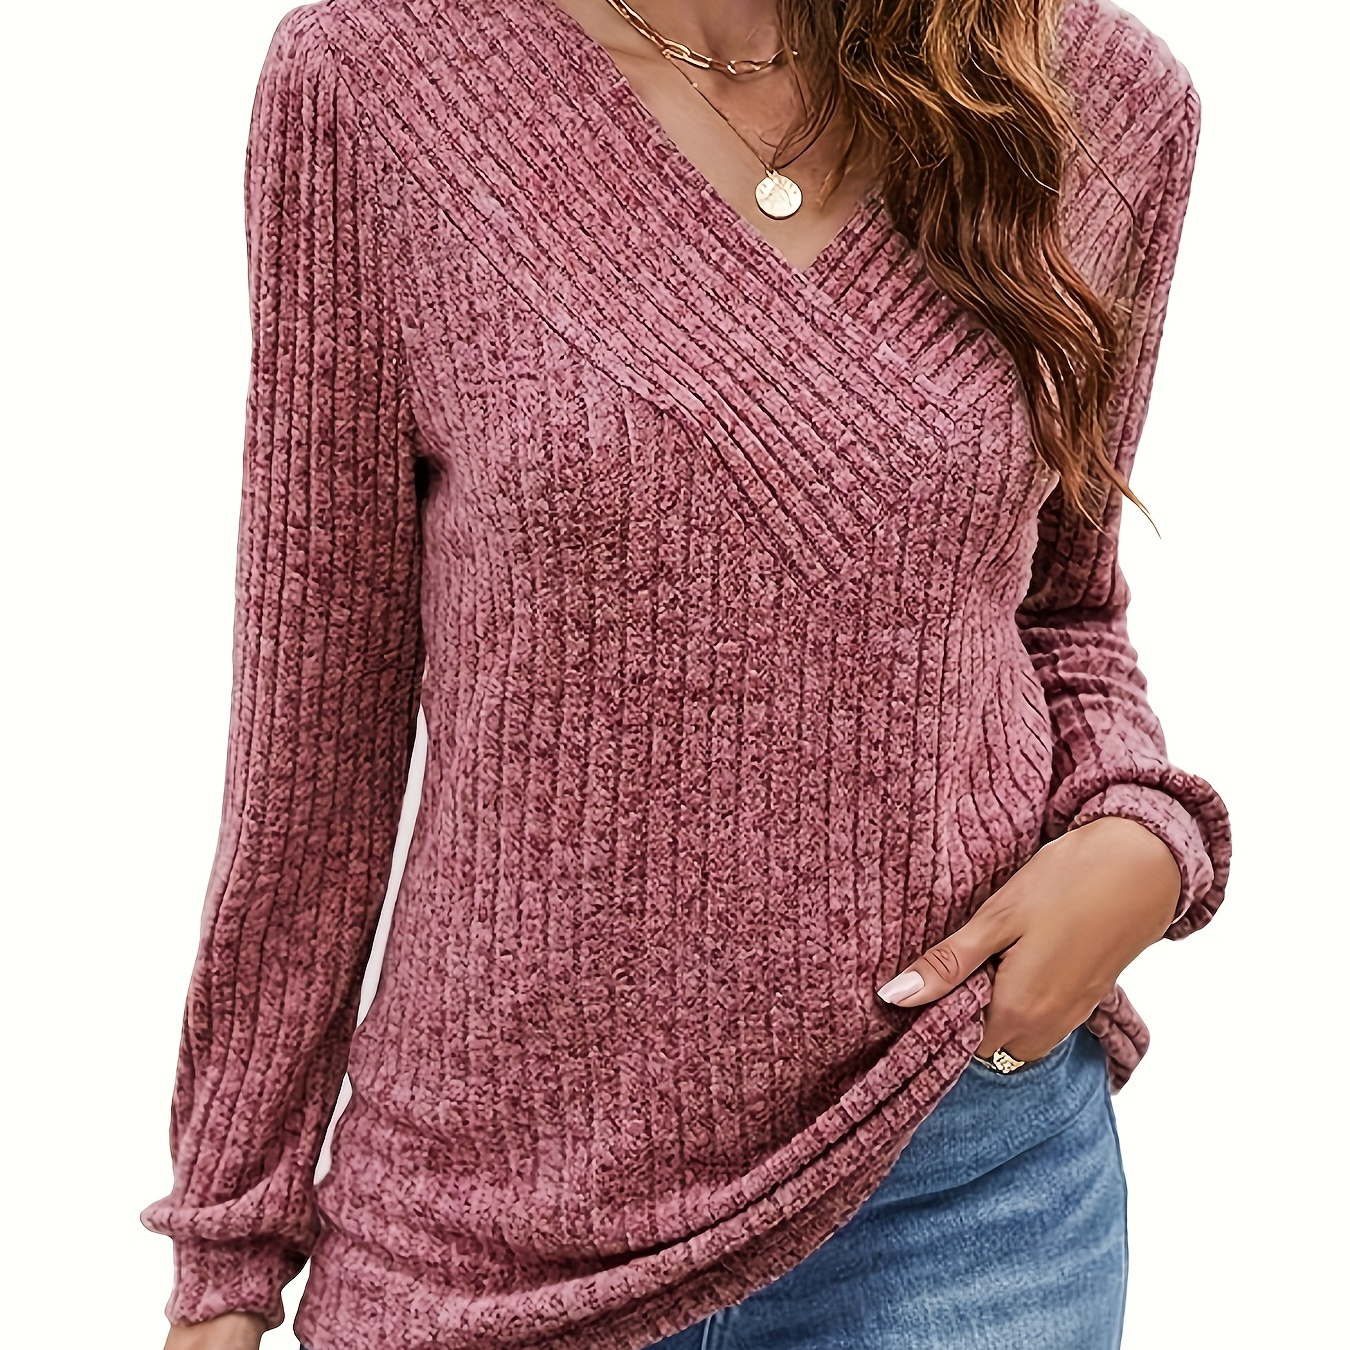 Ribbed Knit V Neck Sweater, Casual Long Sleeve Sweater For Fall & Winter, Women's Clothing